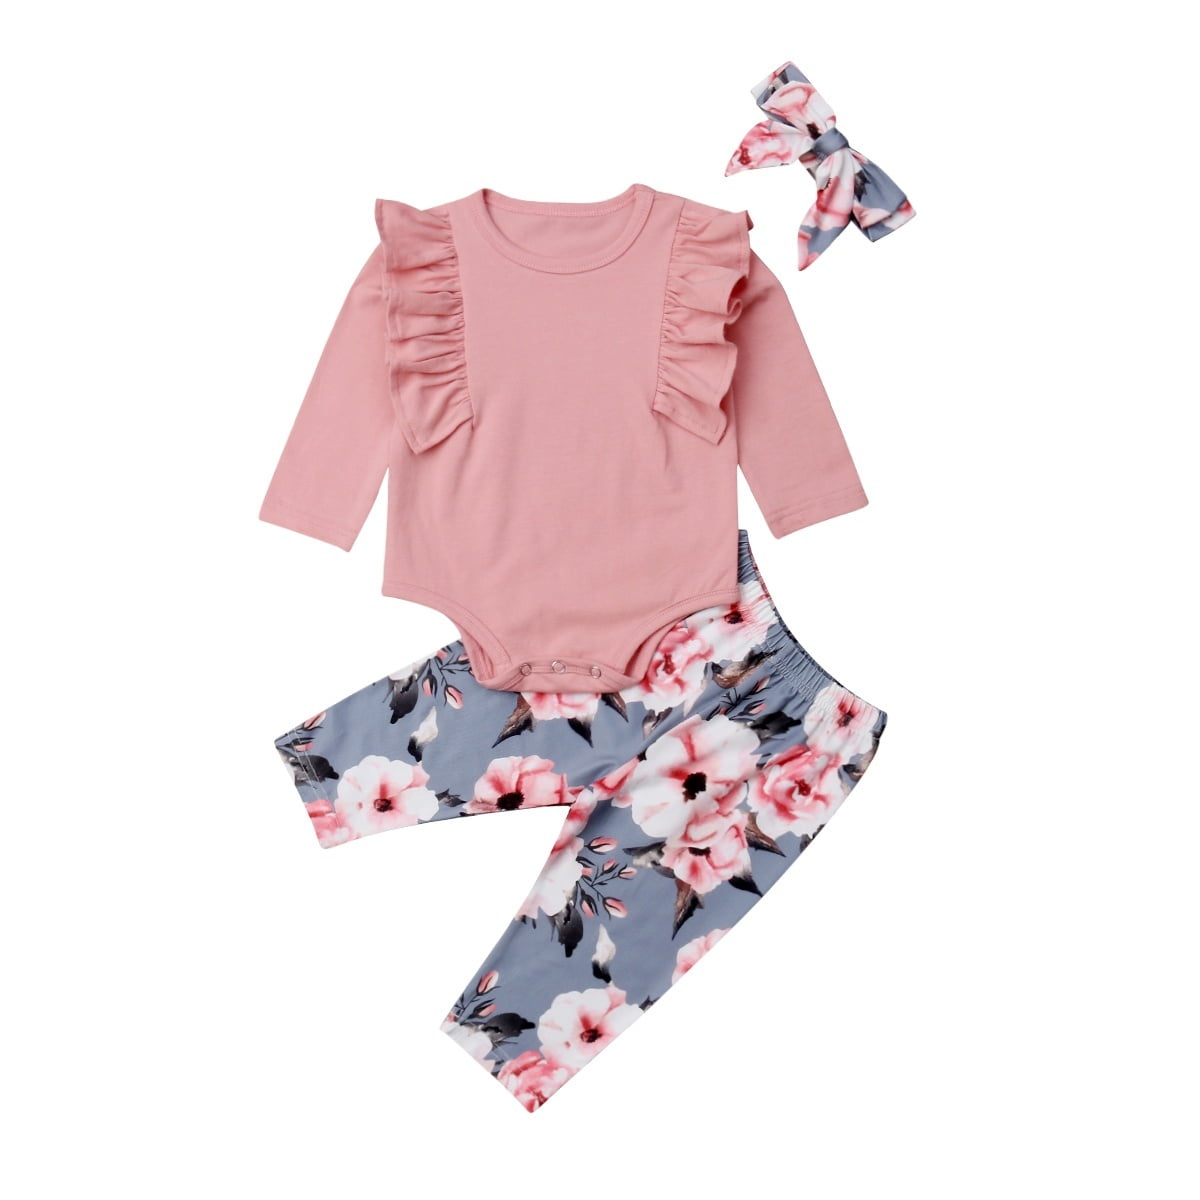 Newborn Infant Baby Girls Floral Bow T-Shirt Tops+Pants Outfits Set Clothes UK 